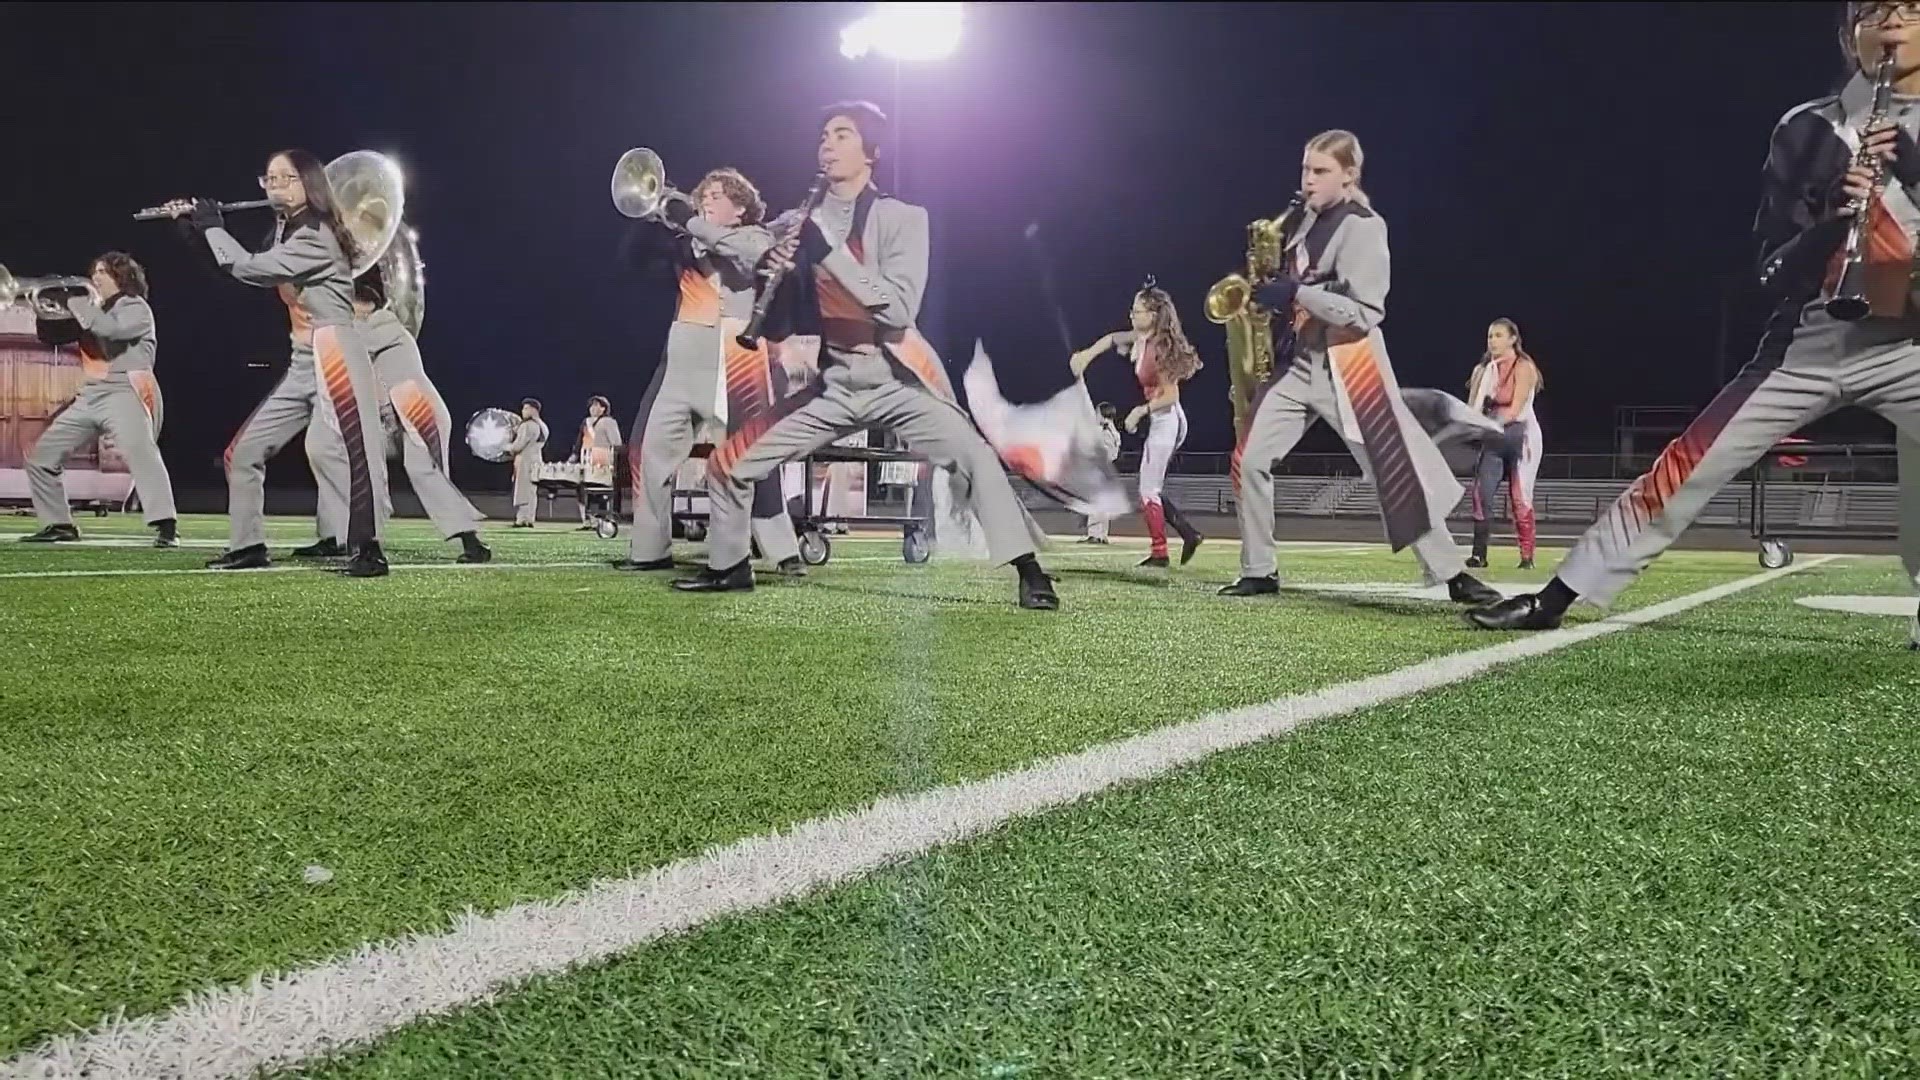 Finalist Valhalla High School edged out by talented marching band in Virginia.